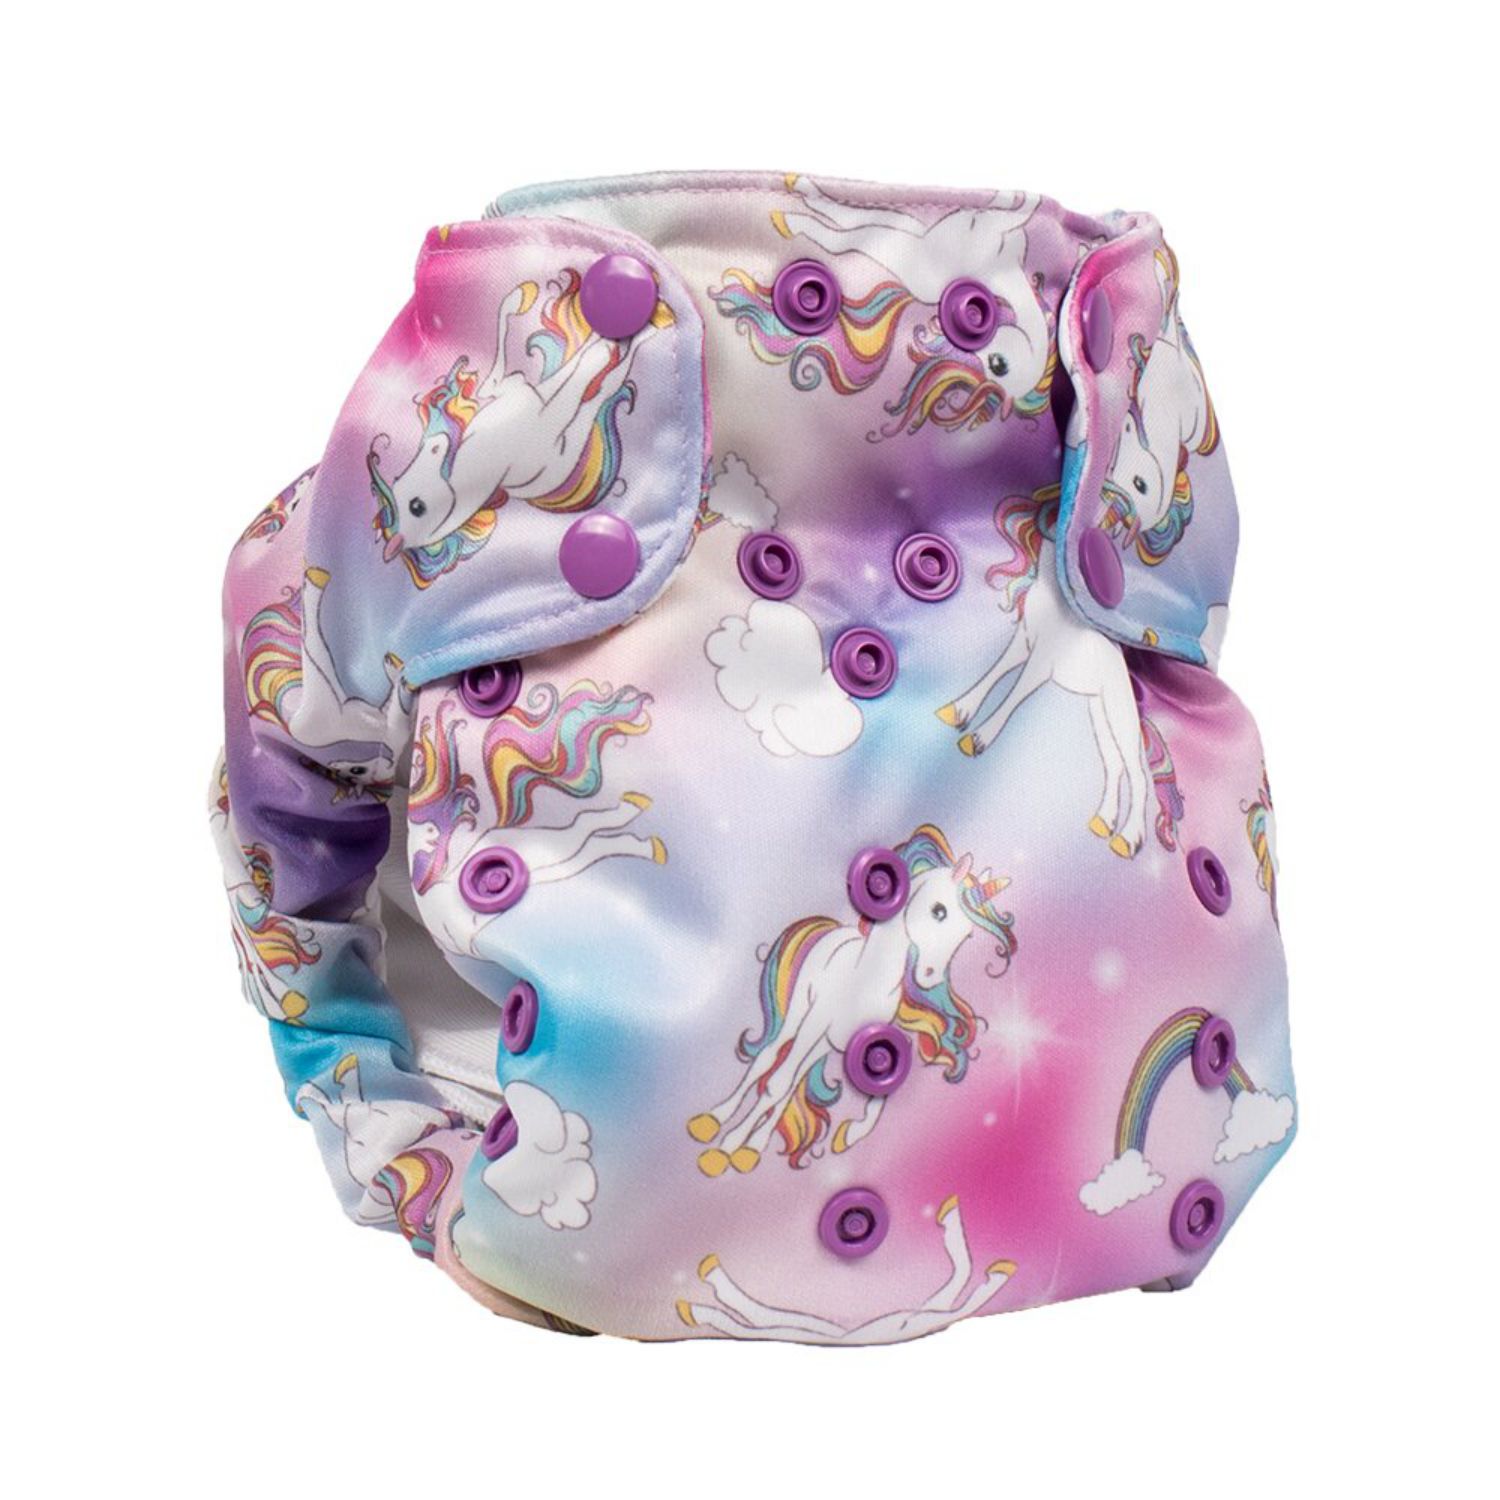 Smart Bottoms 3.1 One Size All-in-One nappy Pattern: Chasing Rainbows